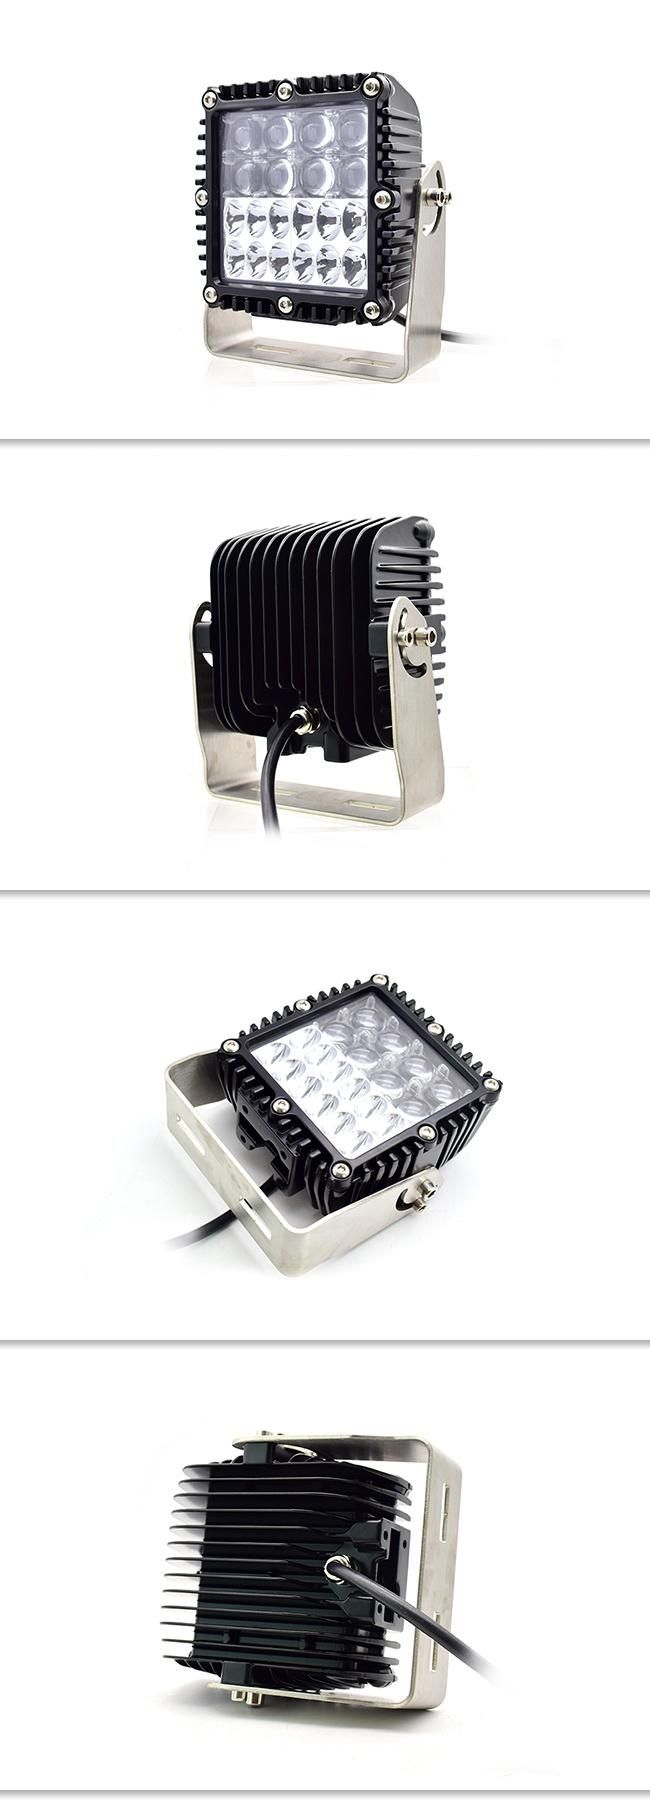 75W Auto LED Work Car Light for Truck Trailer Motorcycle